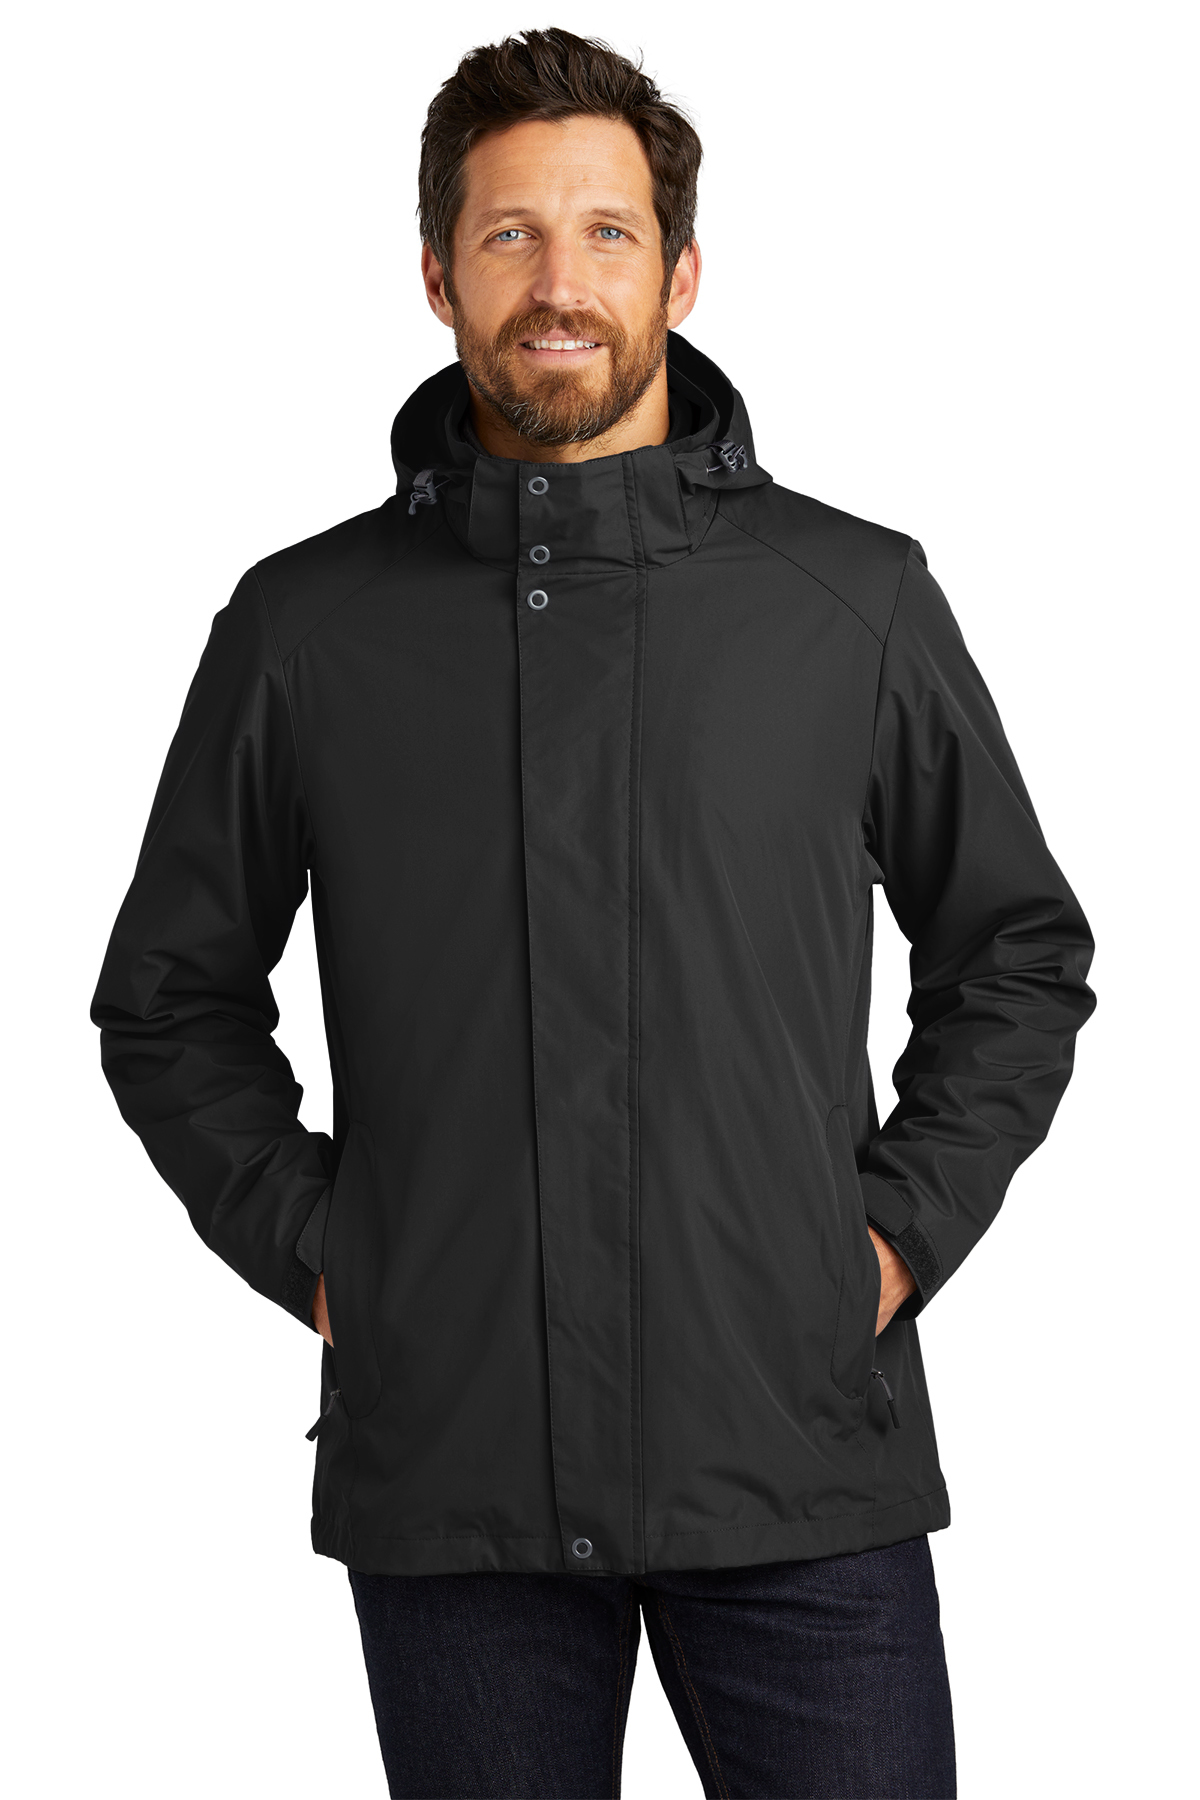 Port Authority All-Weather 3-in-1 Jacket, Product